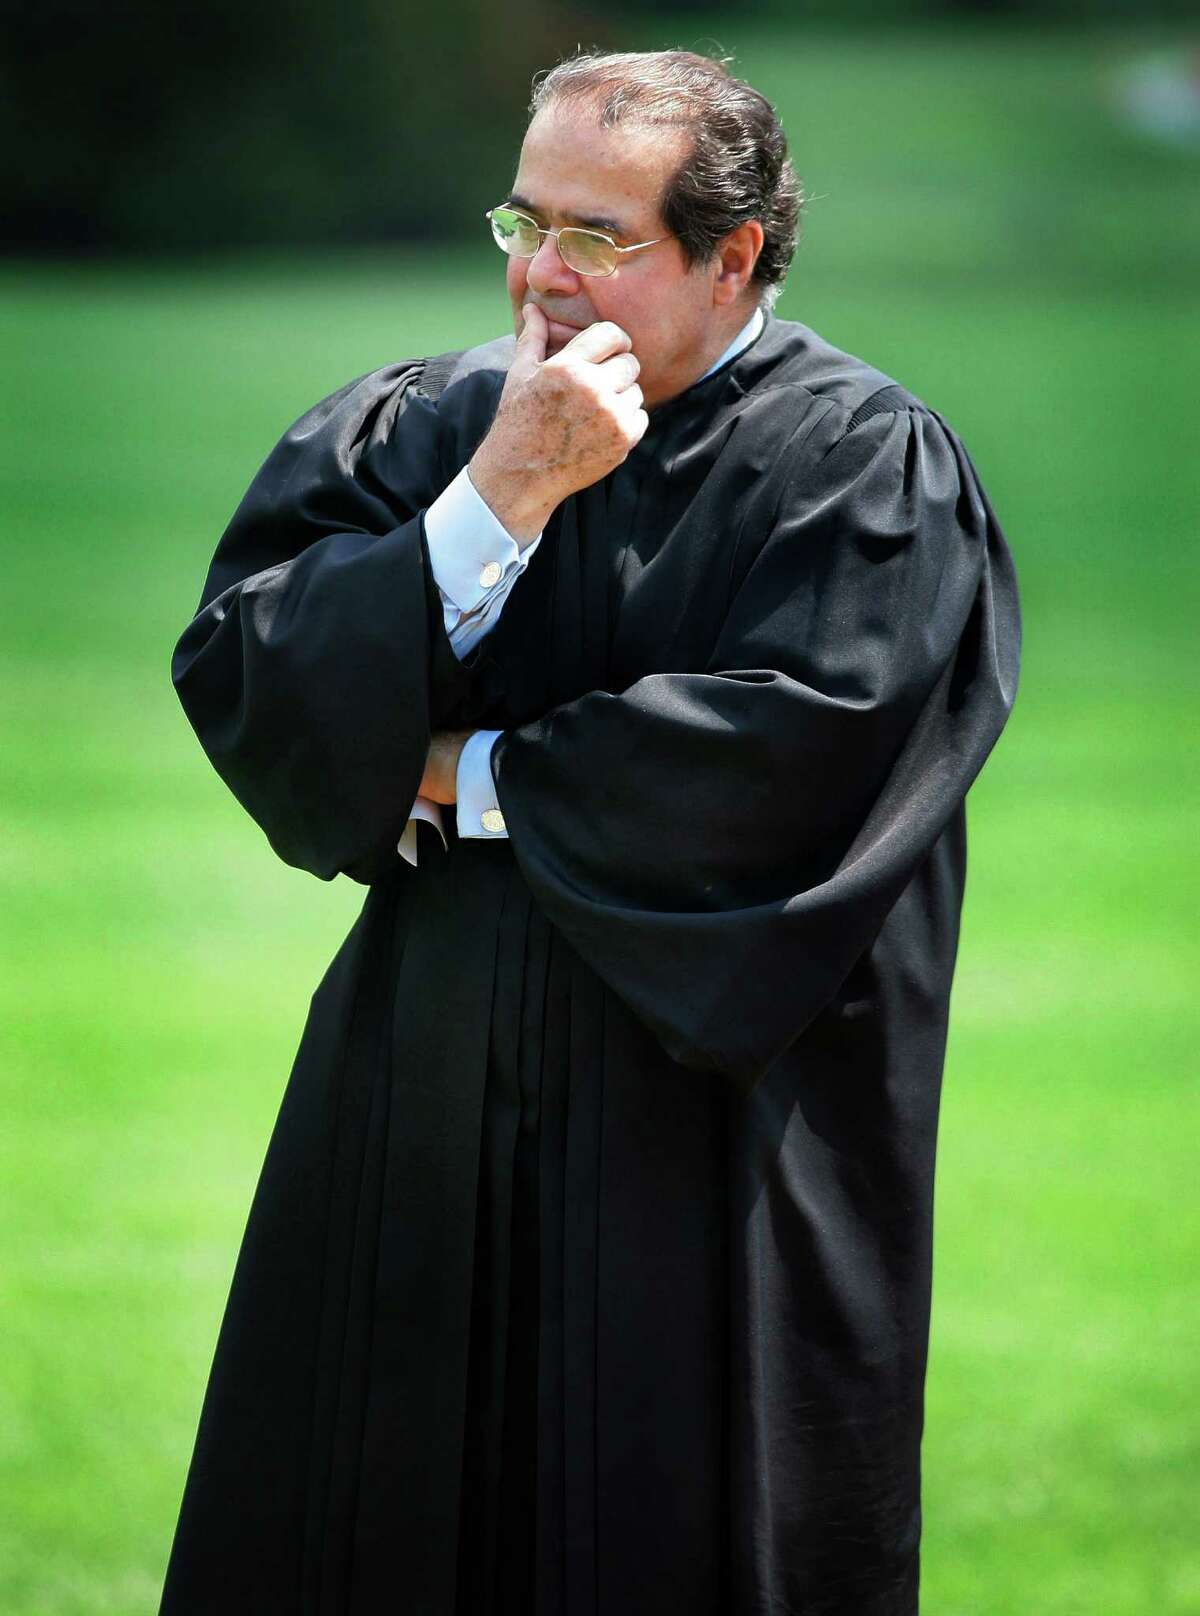 FILE - In this June 7, 2006 file photo, Supreme Court Justice Antonin Scalia listens to President Bush speak during a swearing-in ceremony on the South Lawn at the White House in Washington. On Saturday, Feb. 13, 2016, the U.S. Marshall's Service confirmed that Scalia has died at the age of 79. (AP Photo/Ron Edmonds, File)